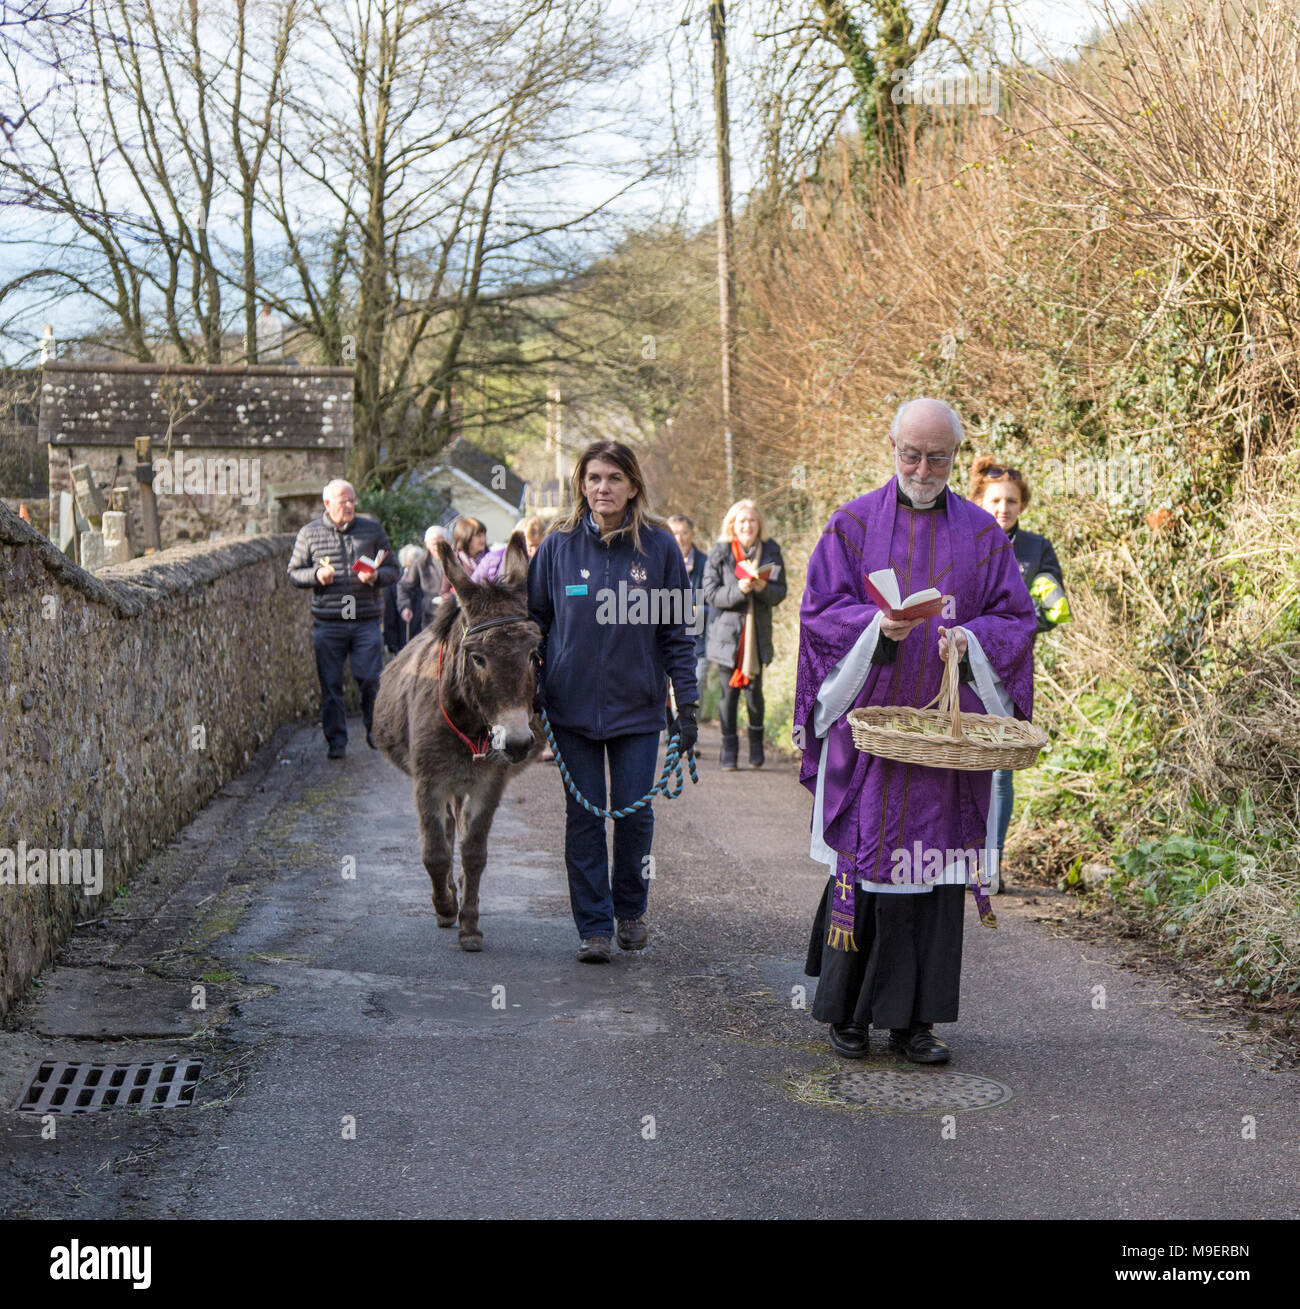 Sidmouth, UK,  25th Mar 18. Ponk the Donk took a starring roll at the Palm Sunday service at Salcombe Regis church, near Sidmouth. The annual event sees parishioners process up the hill, and this year the Rev David Lewis  headed the walk,  together with Ponk, a 14 year old donkey from the nearby Sidmouth Donkey Sanctuary. Photo Central / Alamy Live News. Credit: Photo Central/Alamy Live News Stock Photo